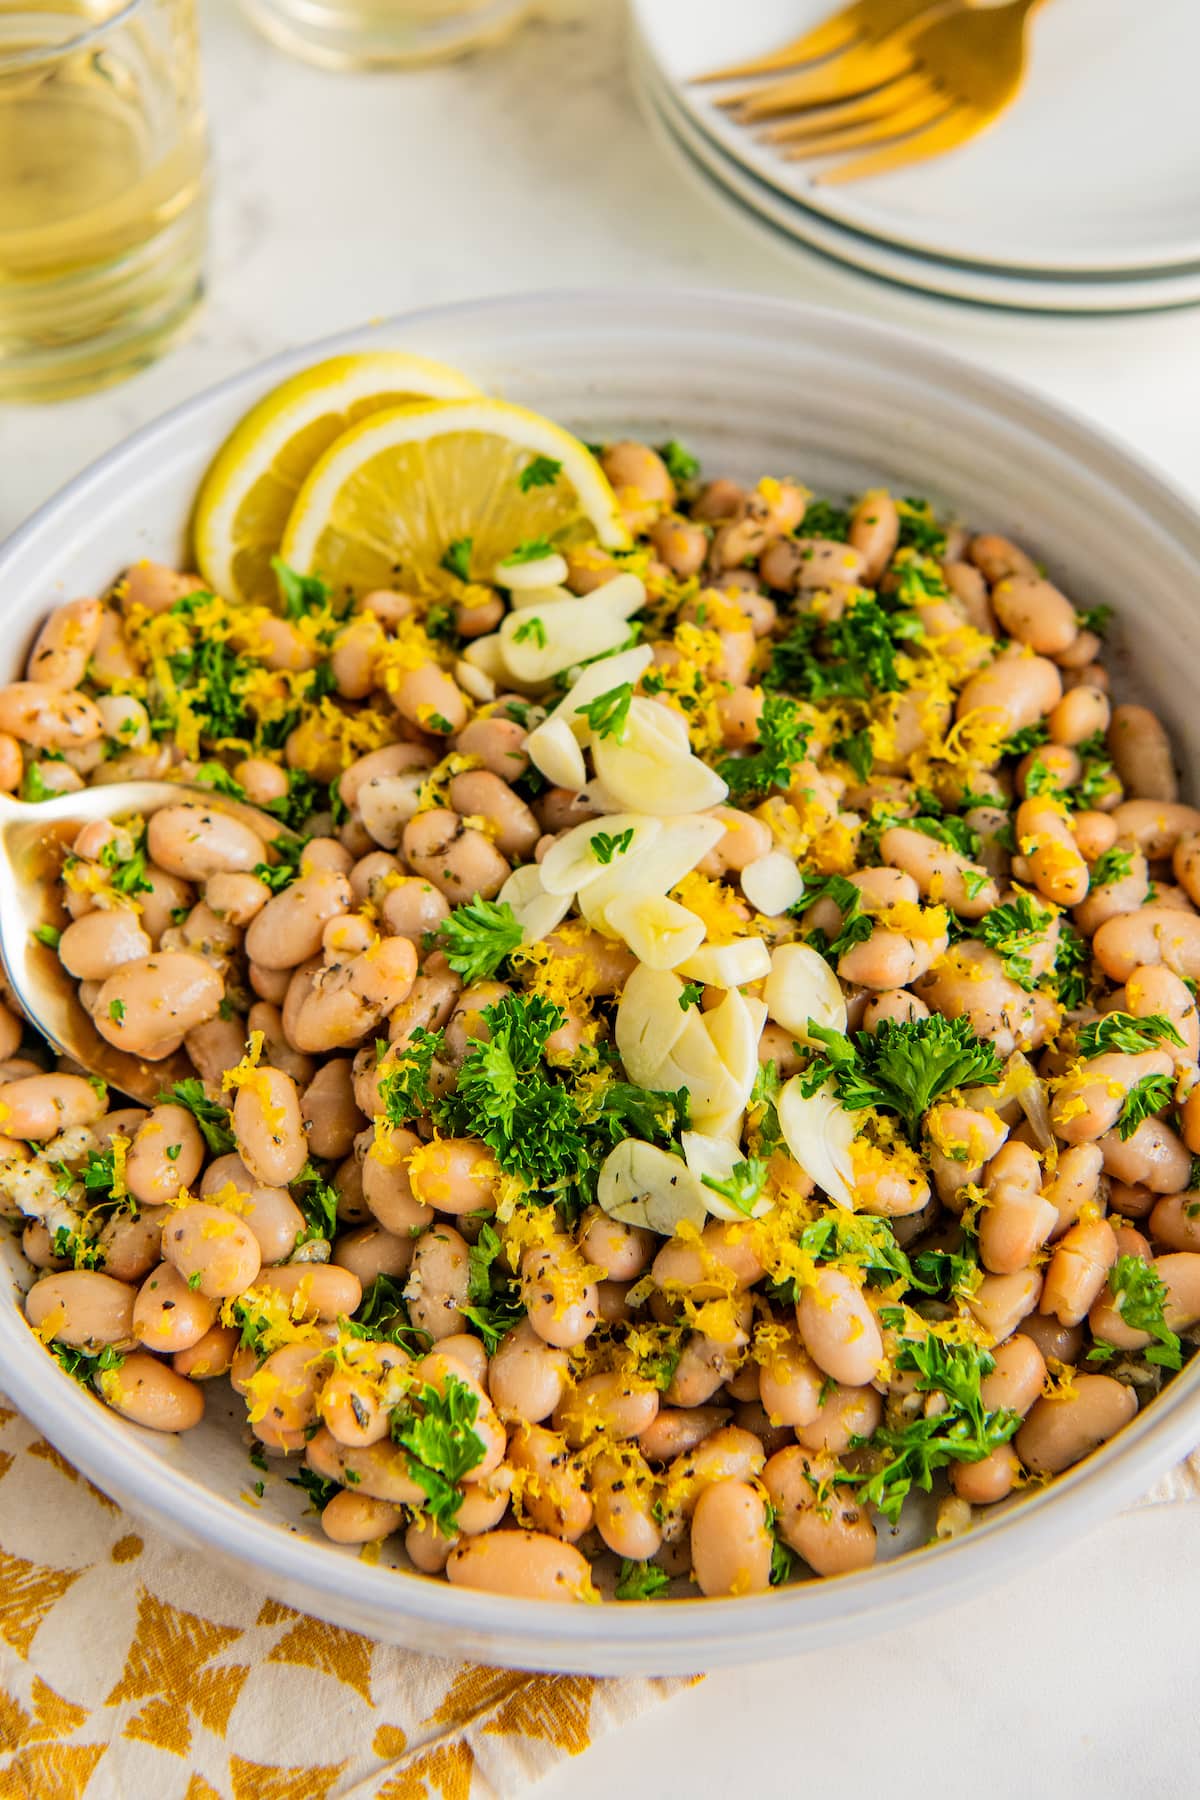 White bean salad in a white bowl garnished with fresh lemon zest and sliced garlic.